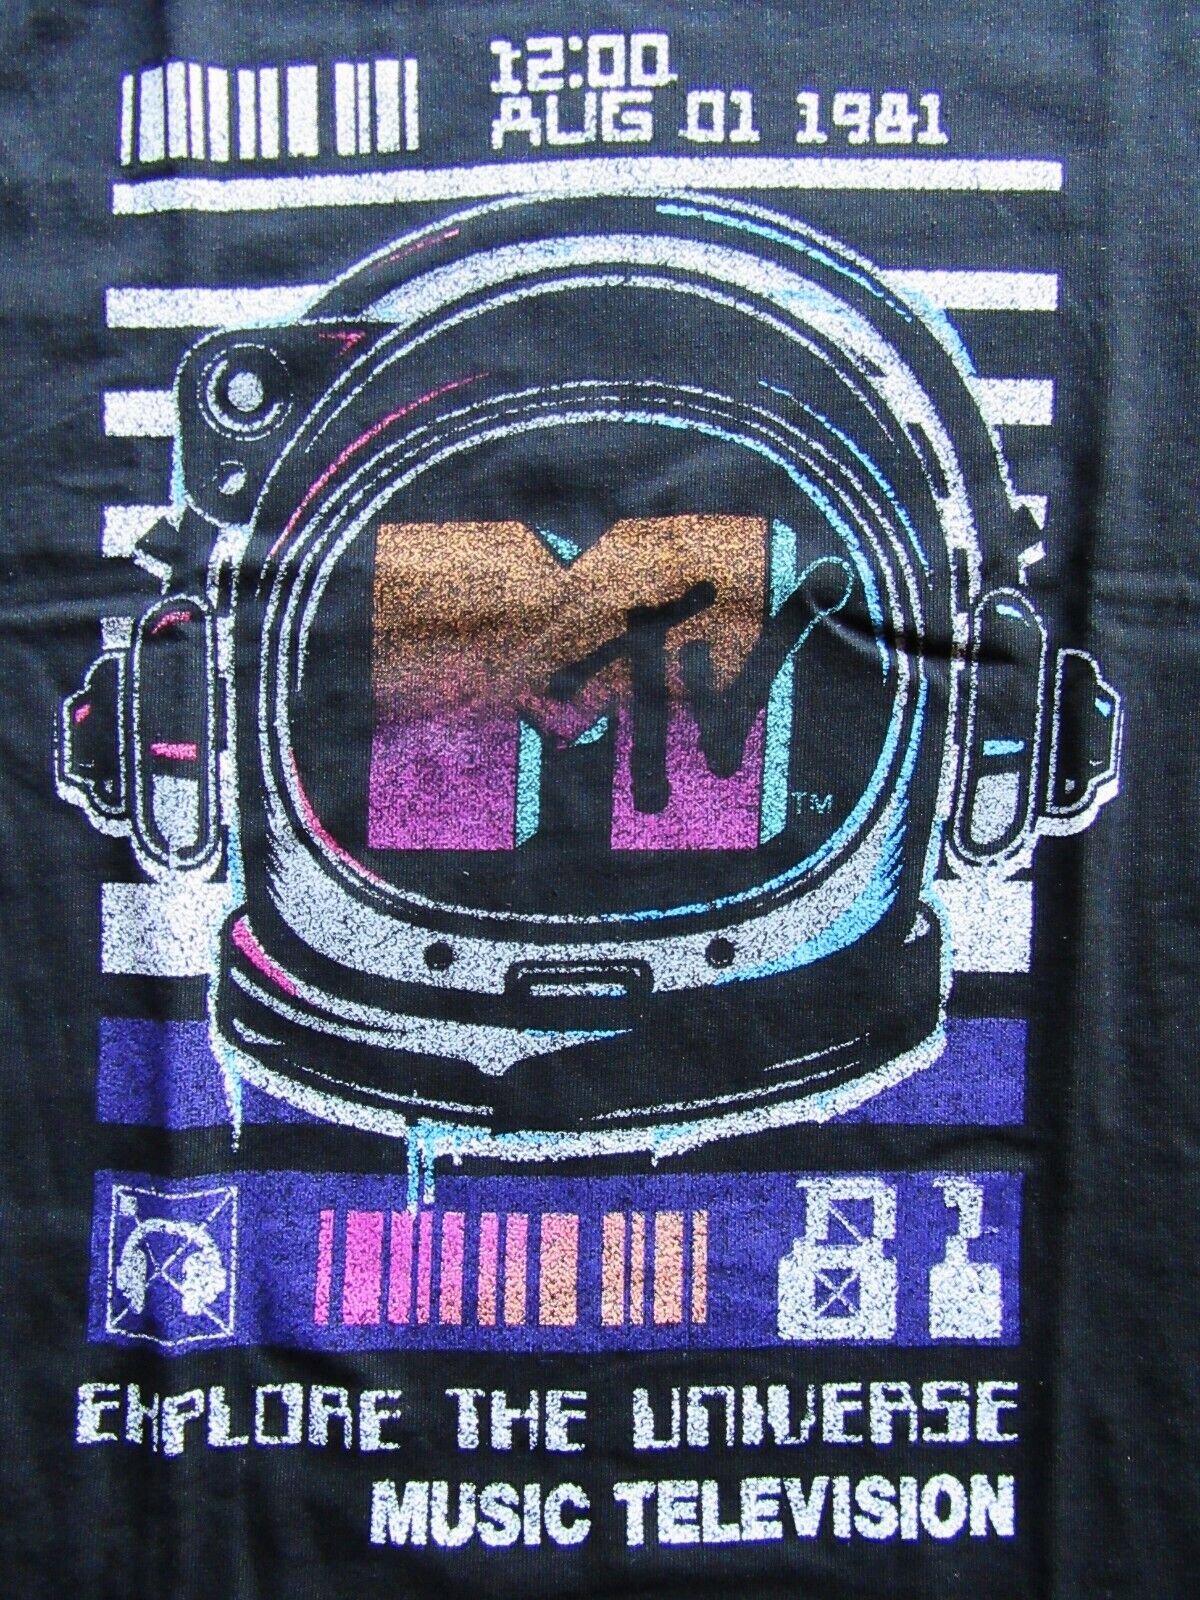 MTV ~ Music Television 12:00 August 1, 1981 ~ Small Black ~ Size S ~ T Shirt